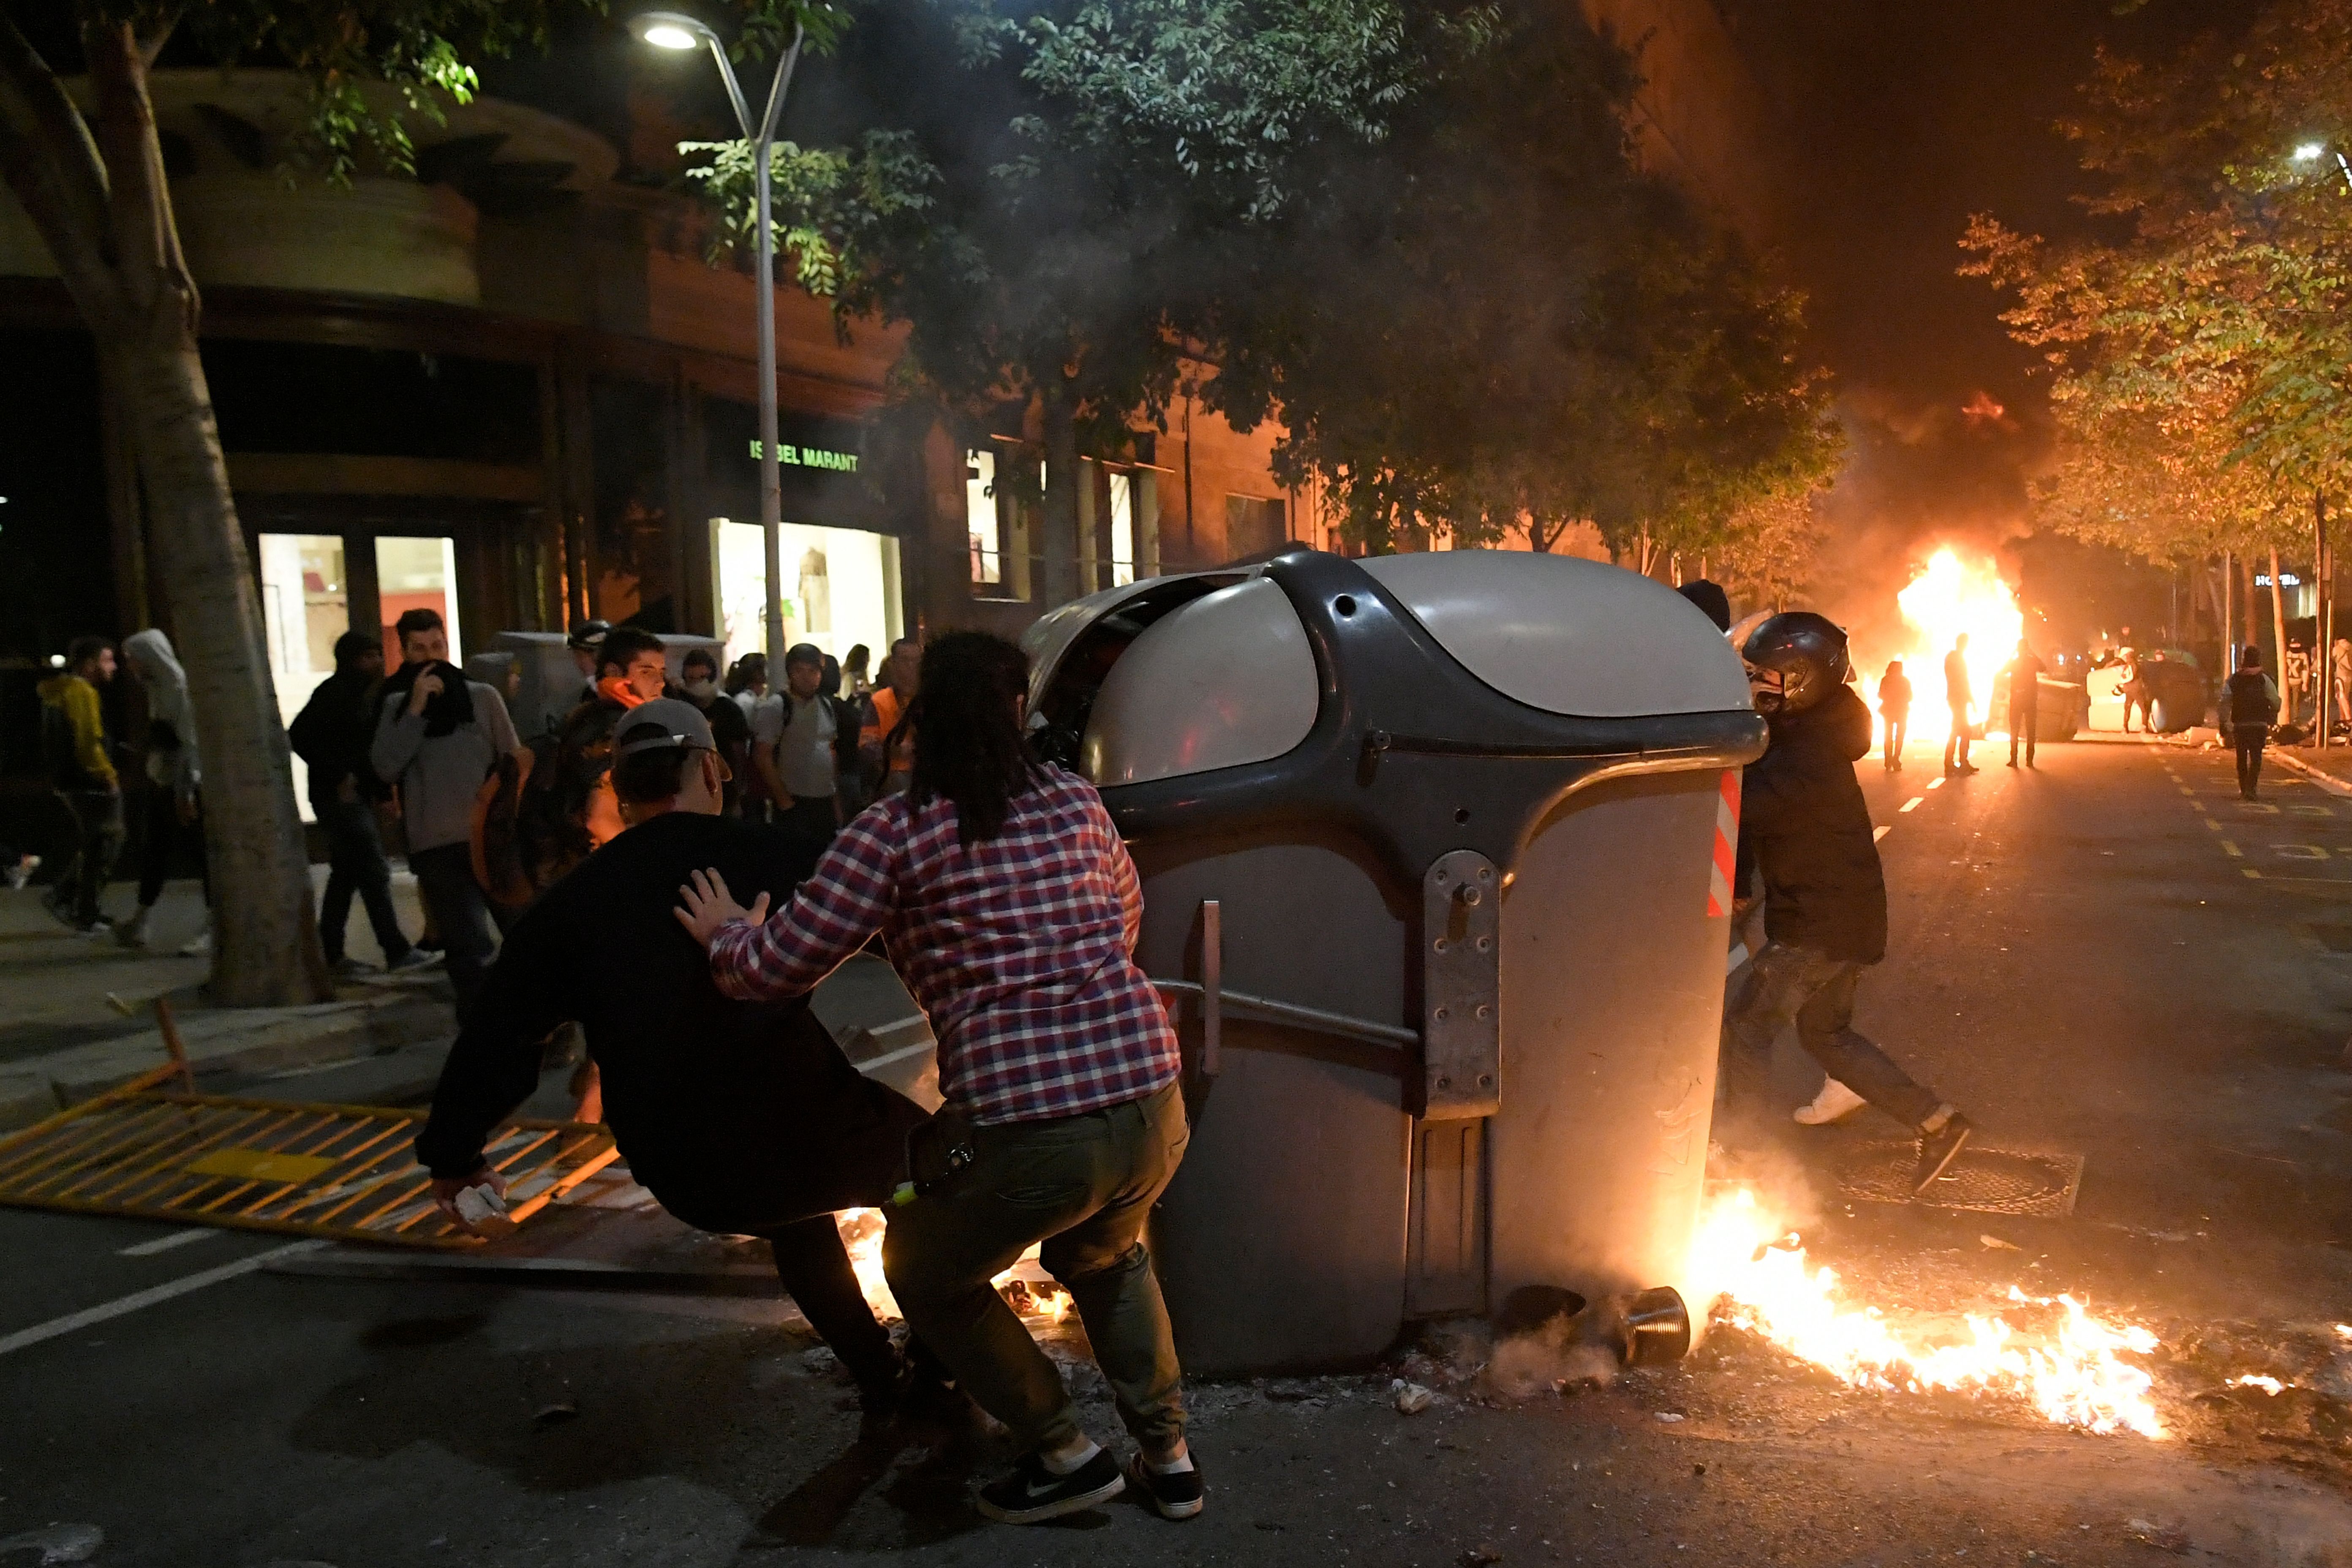 Protesters burn garbage containers during protests in Barcelona on October 15